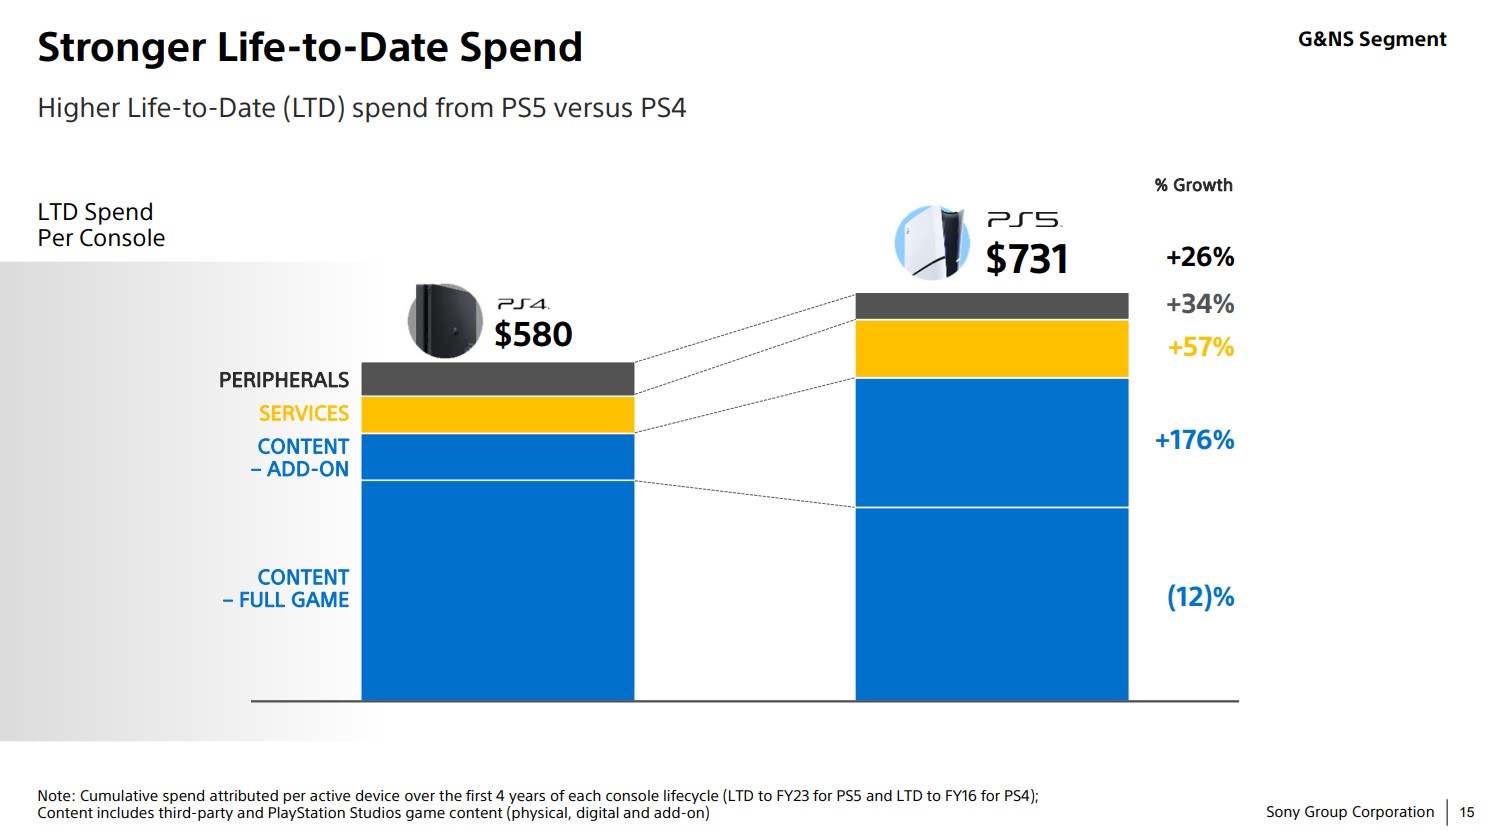 Life to Date LTD Spend for PS4 and PS5